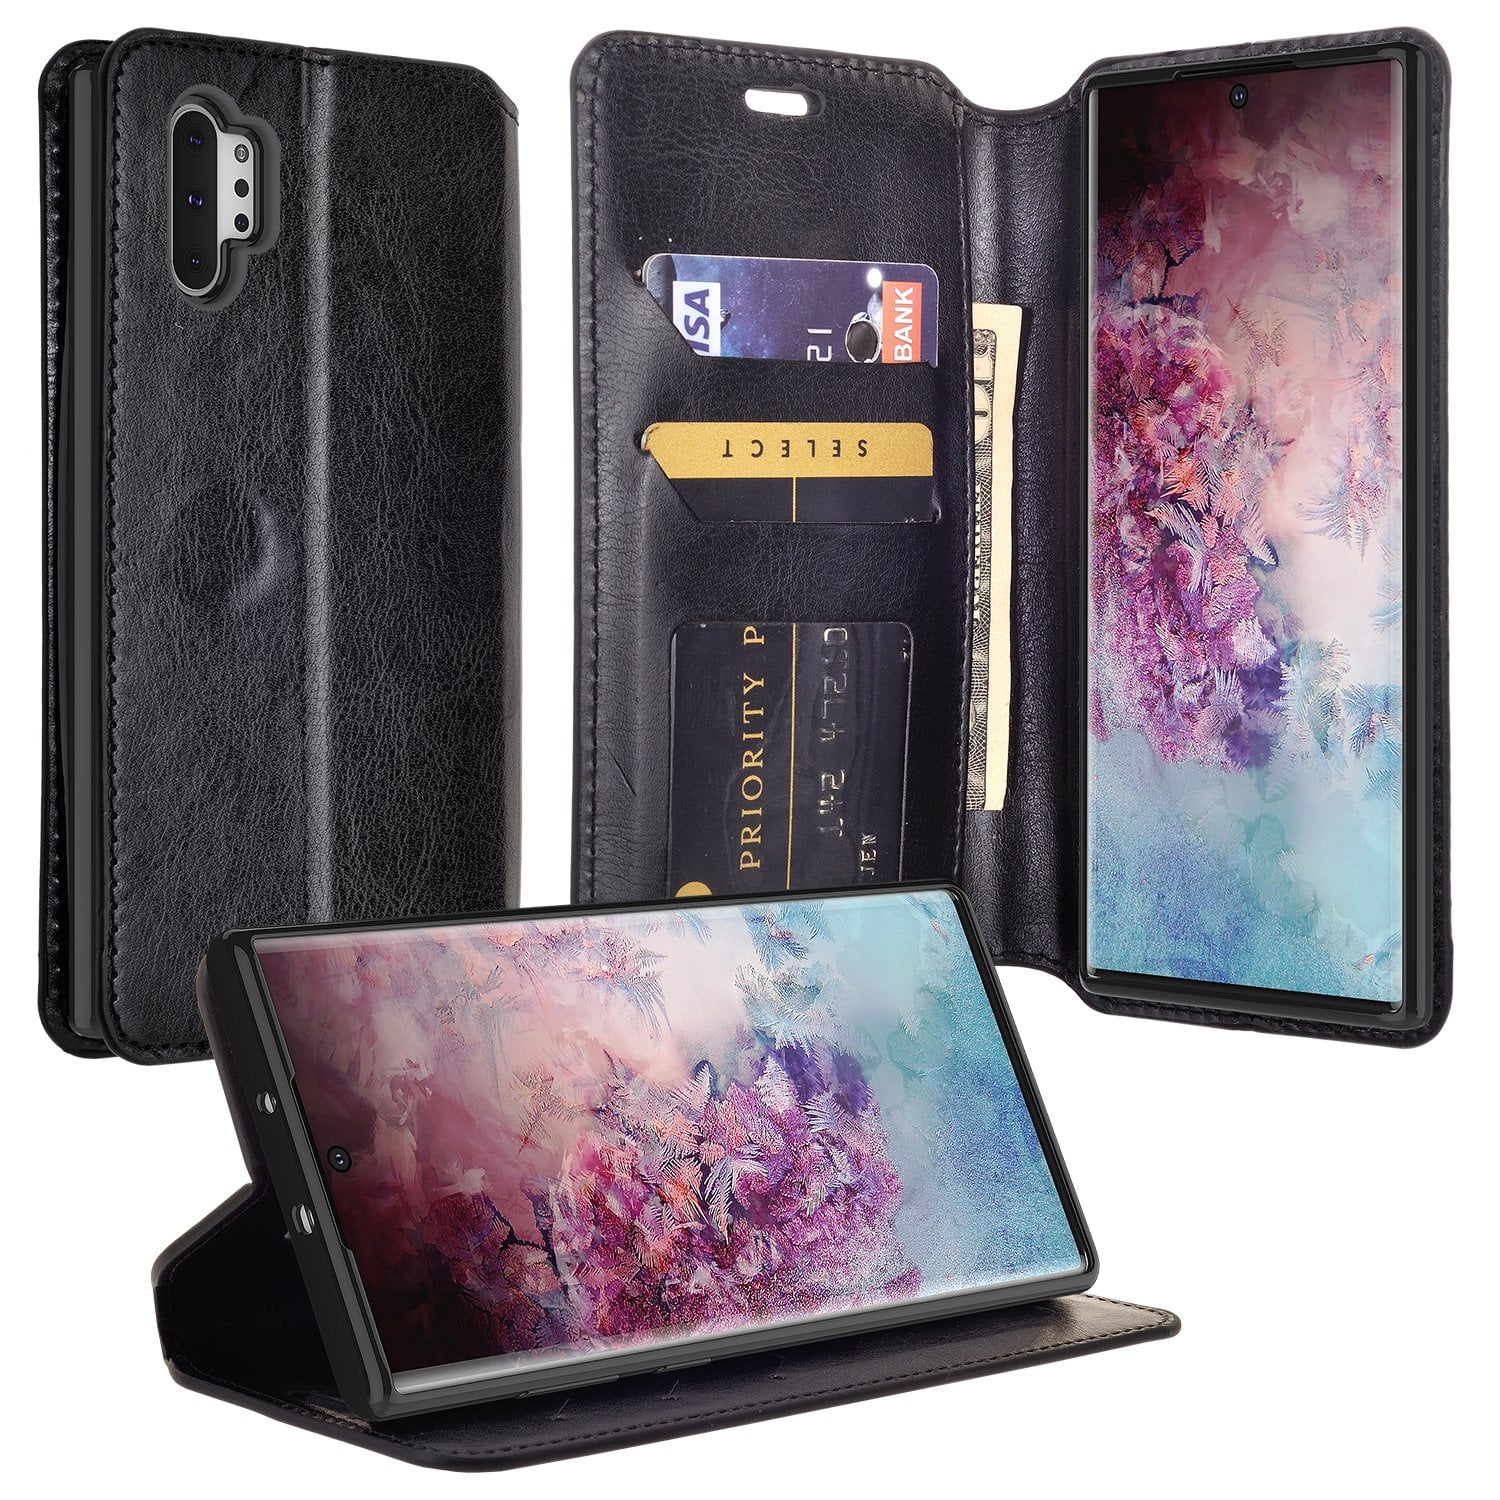 Cover for Samsung Galaxy Note10 Leather Kickstand Premium Business Wallet case Card Holders with Free Waterproof-Bag Samsung Galaxy Note10 Flip Case 